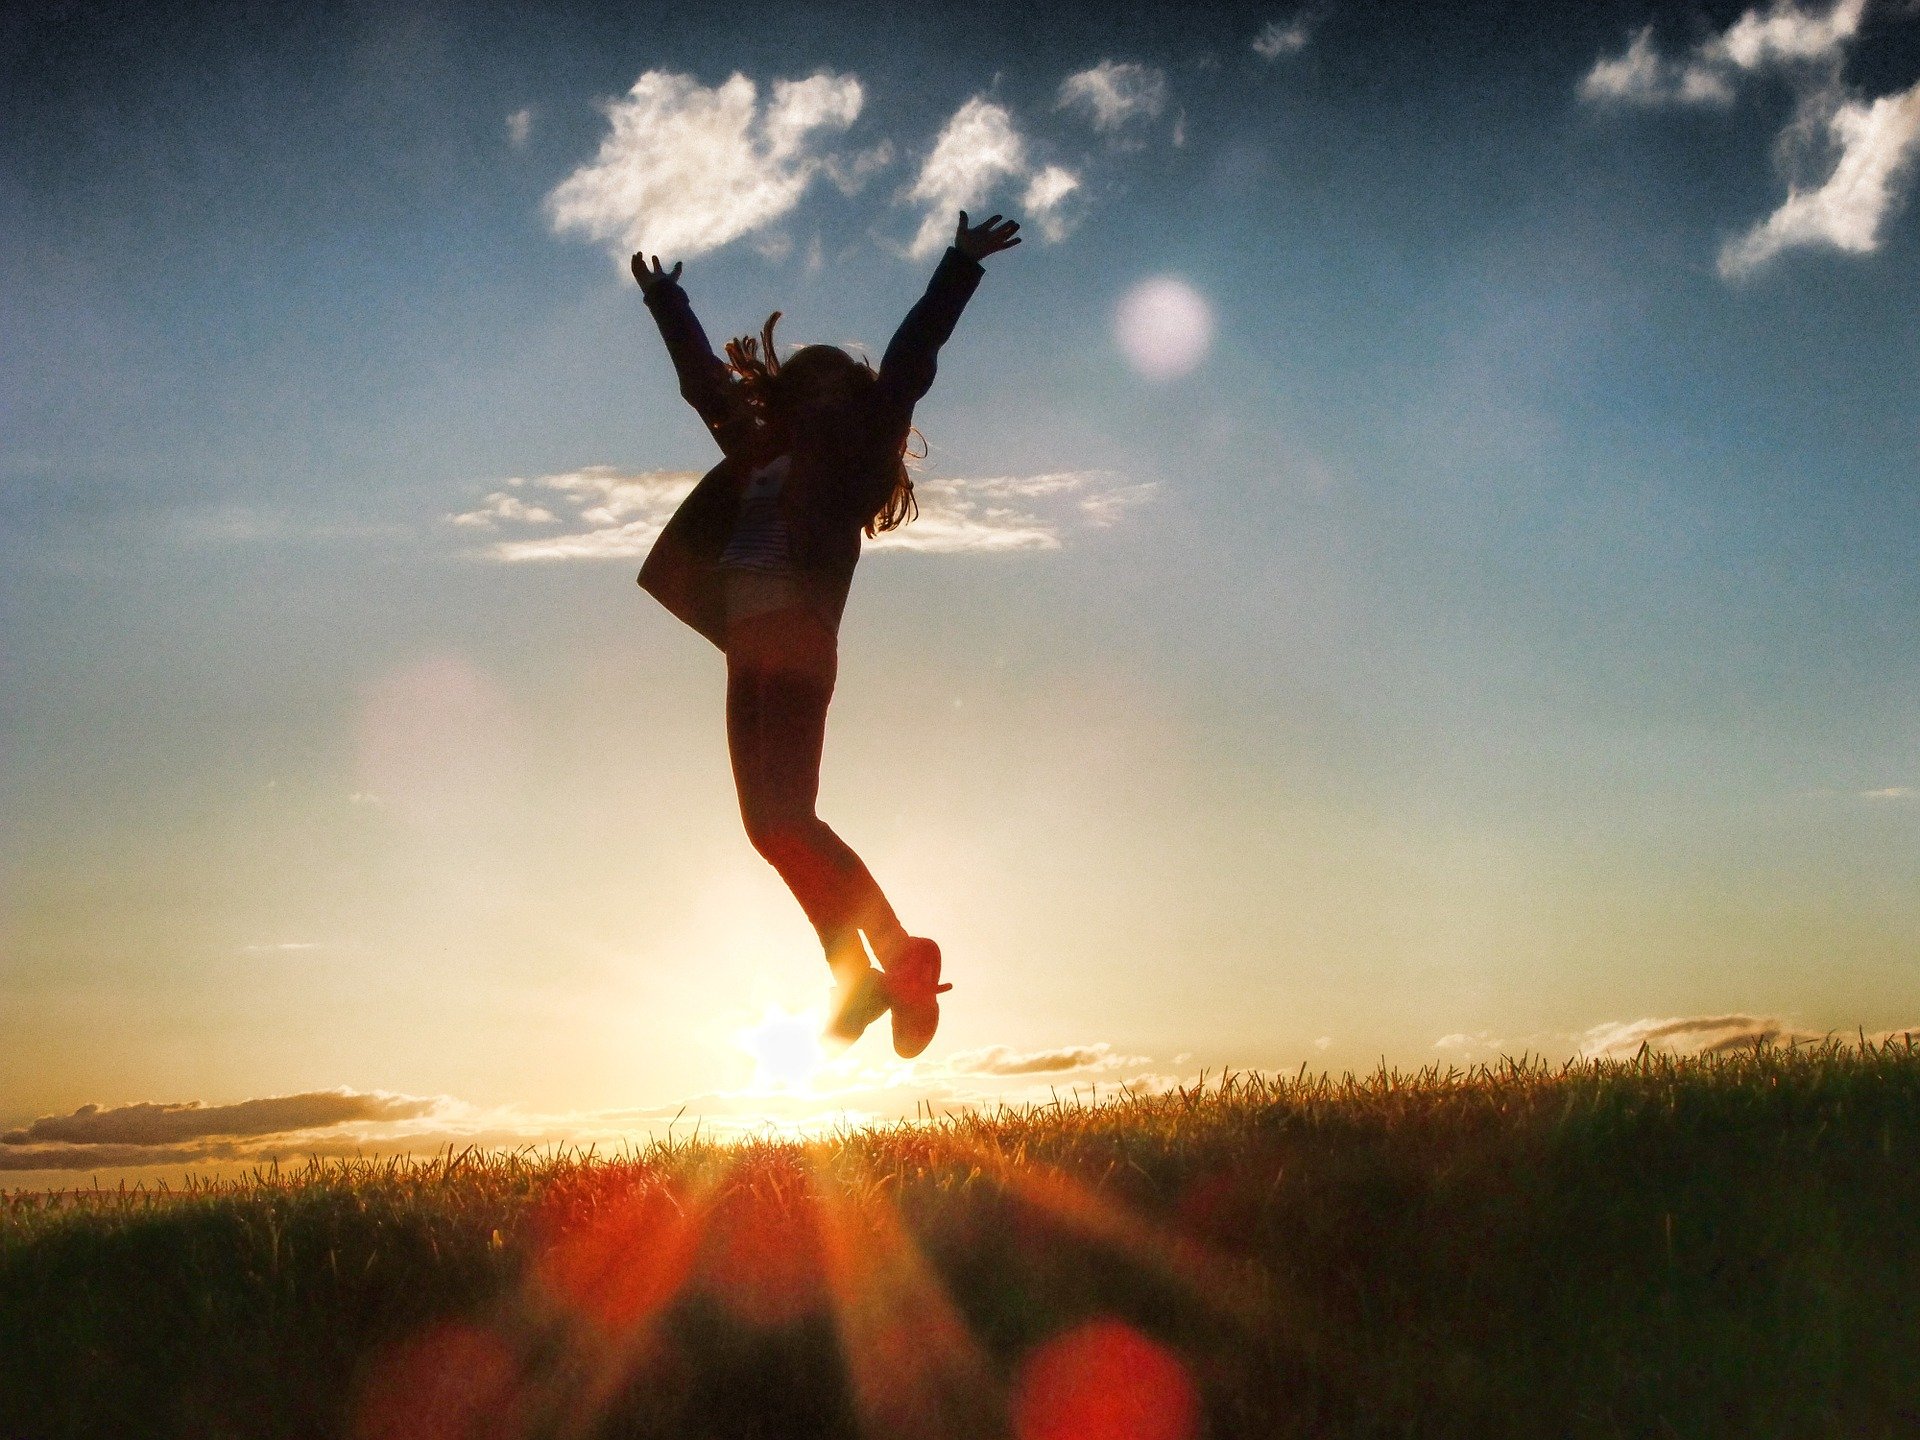 silhouette of a person jumping up in the air in a field at sunset